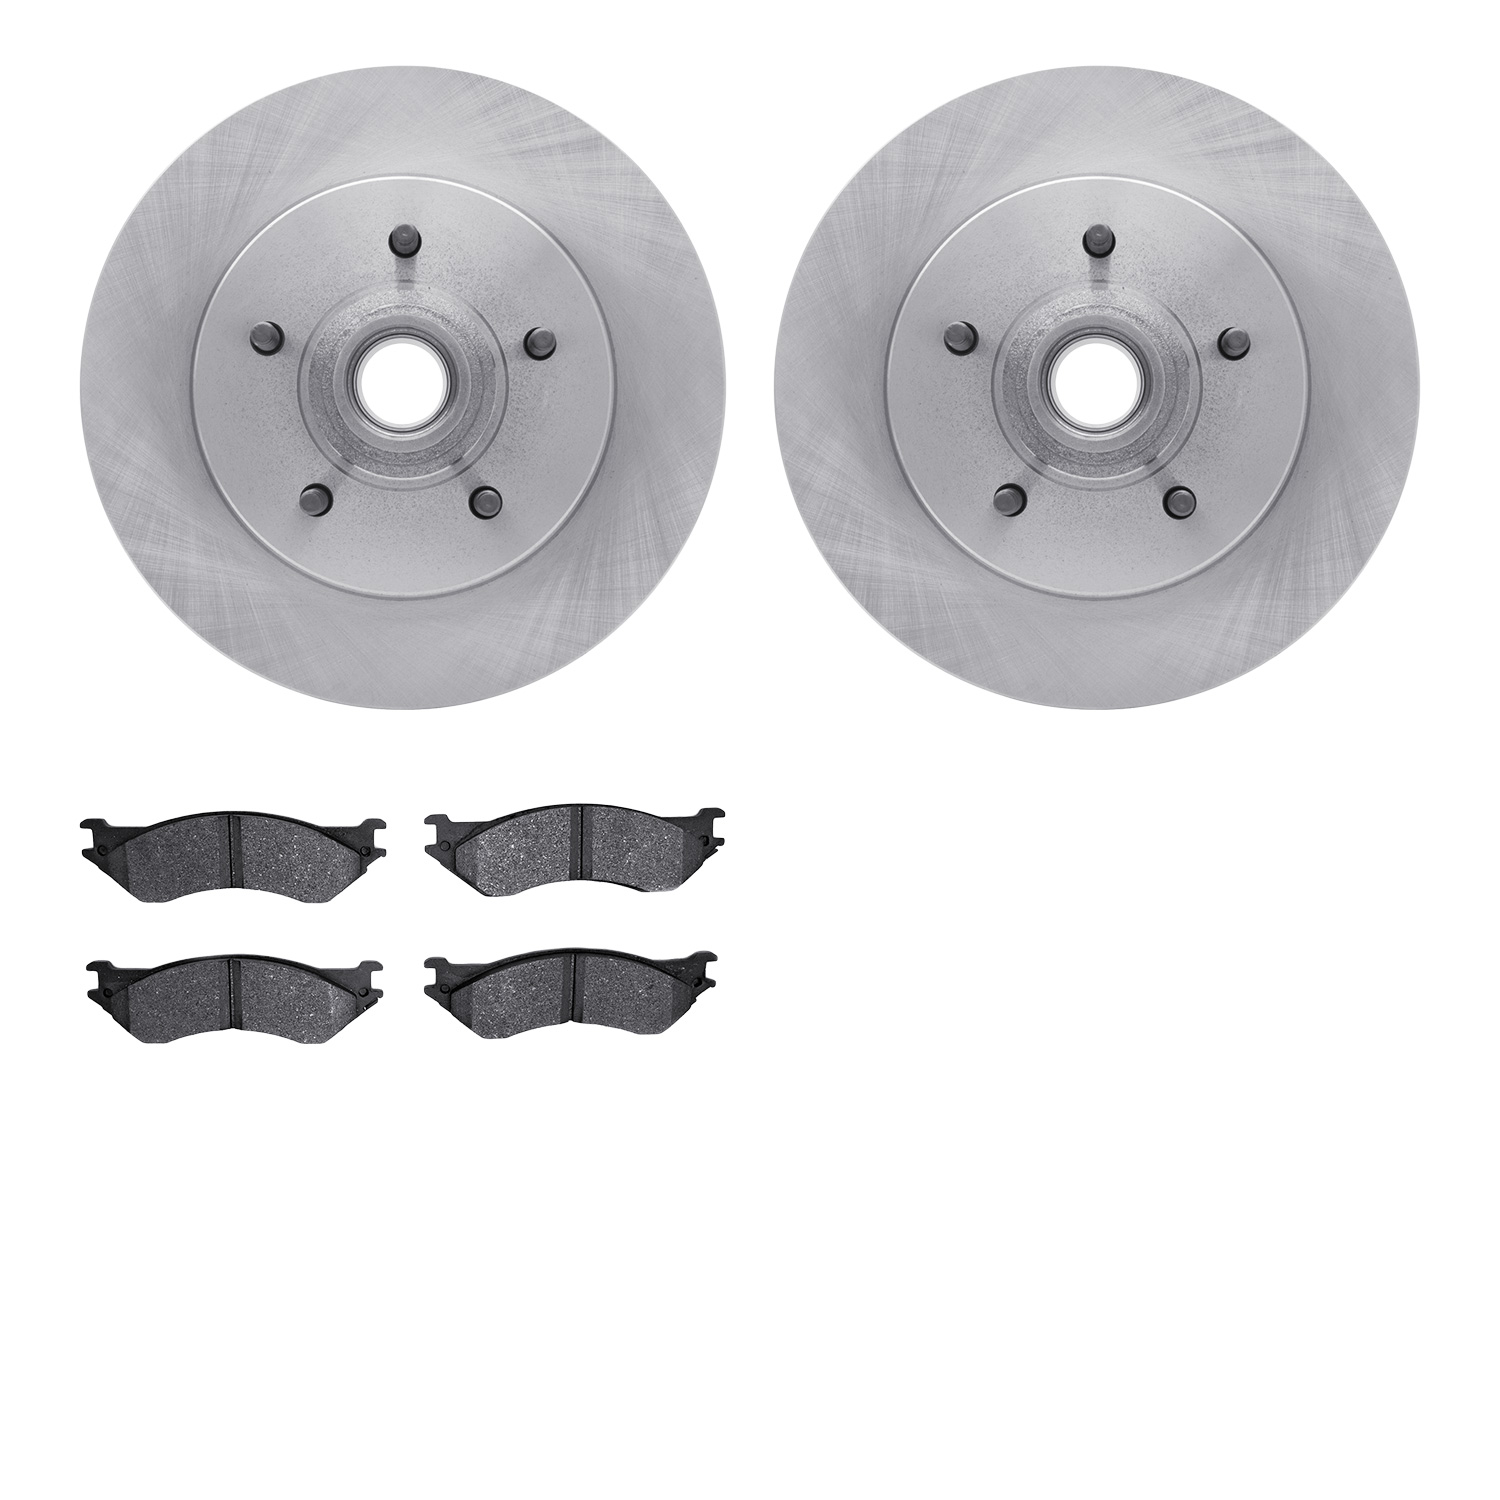 6402-54113 Brake Rotors with Ultimate-Duty Brake Pads, 1997-2000 Ford/Lincoln/Mercury/Mazda, Position: Front